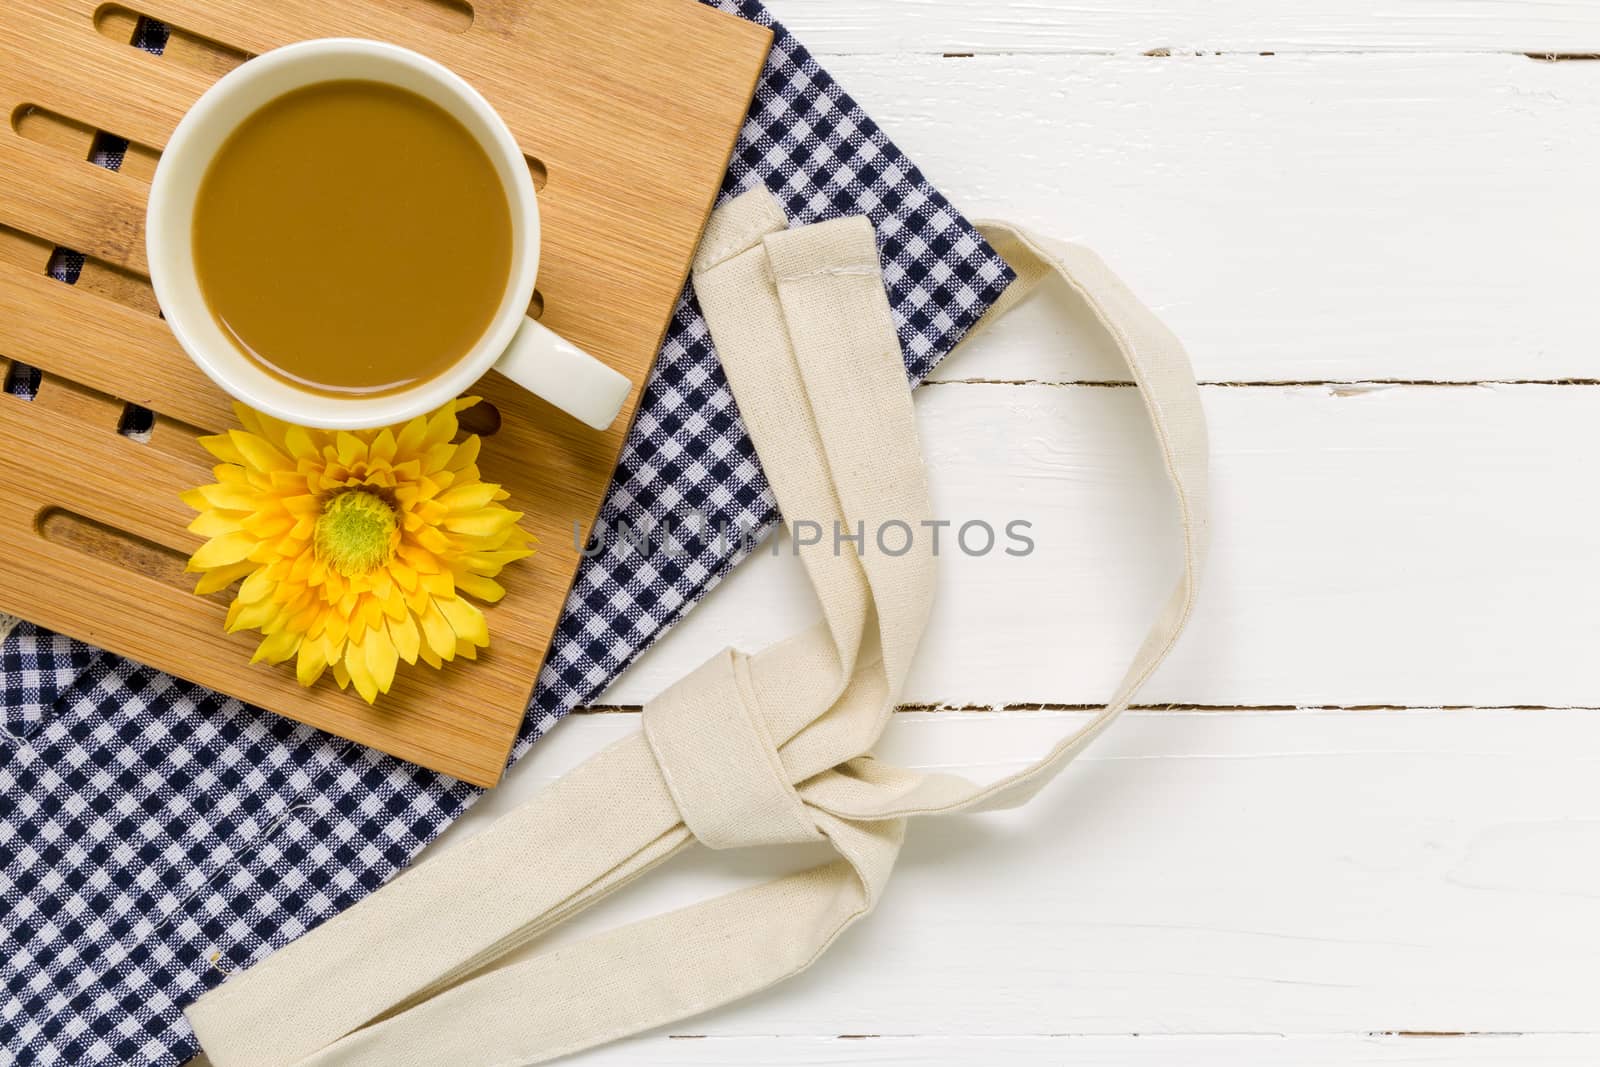 Coffee Cup Relaxing Background / Coffee Cup Relaxing / Coffee Cu by supparsorn